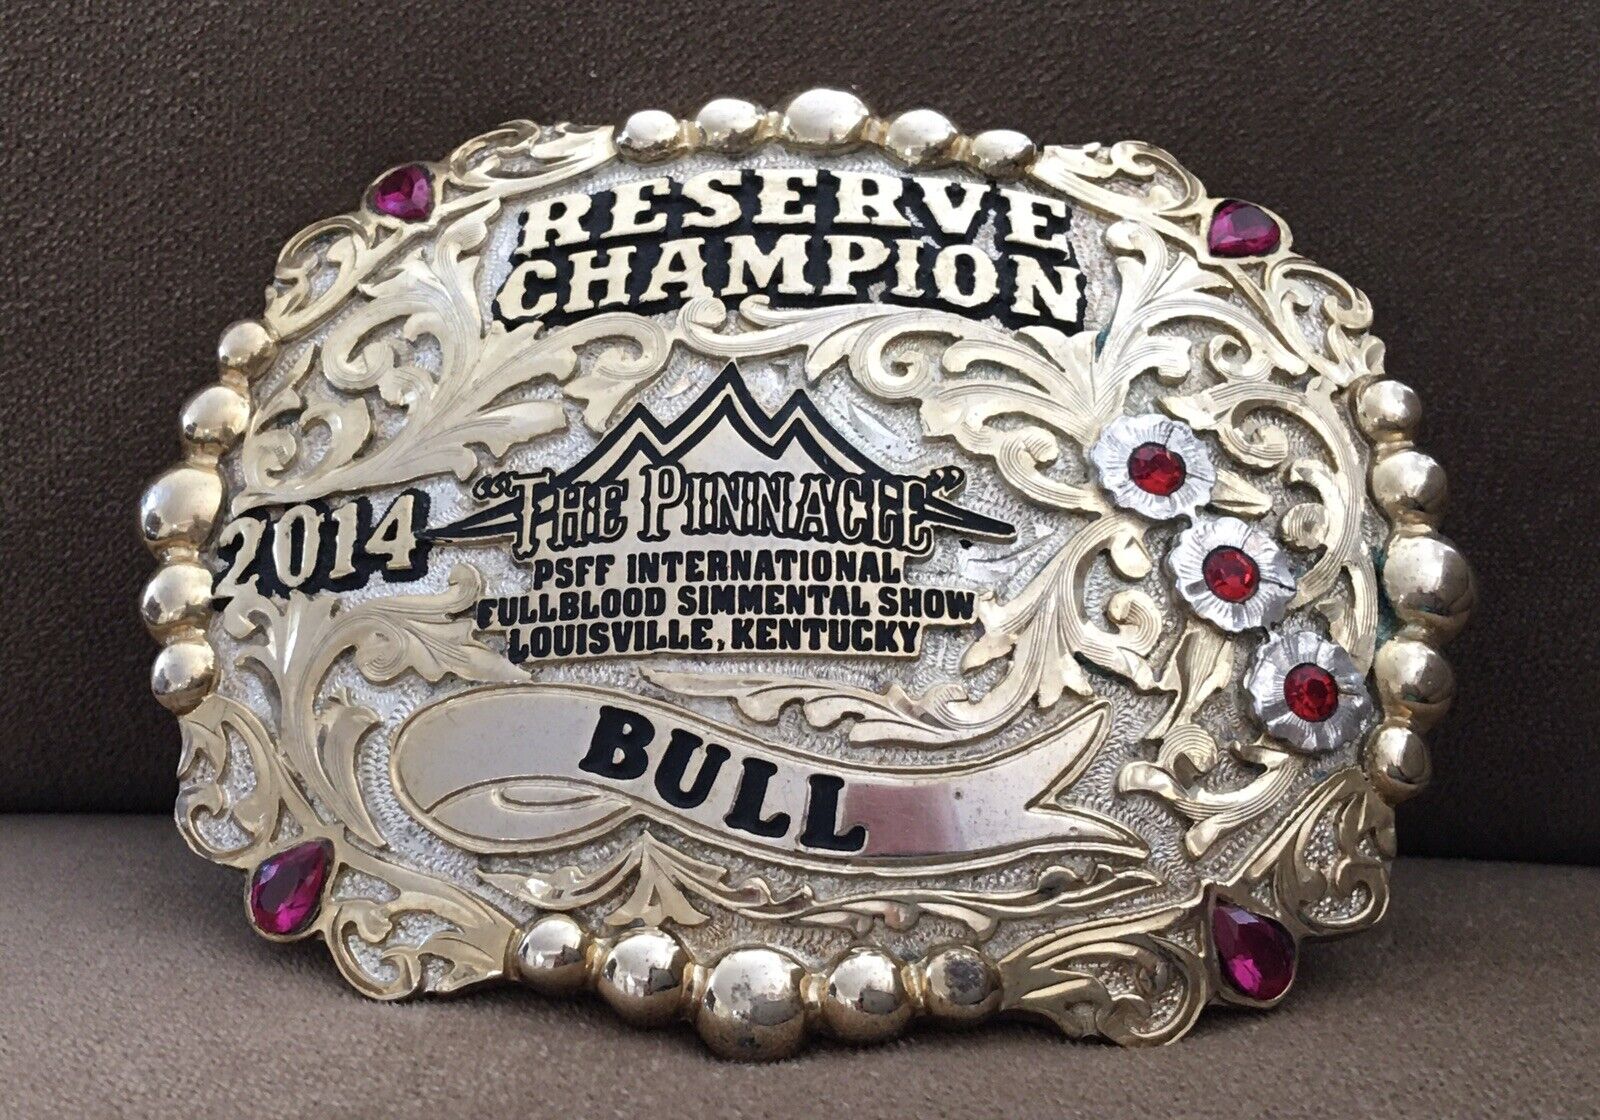 VTG 2014 The Pinnacle PSFF Simmental Bull Reserve Champion Trophy Belt Buckle